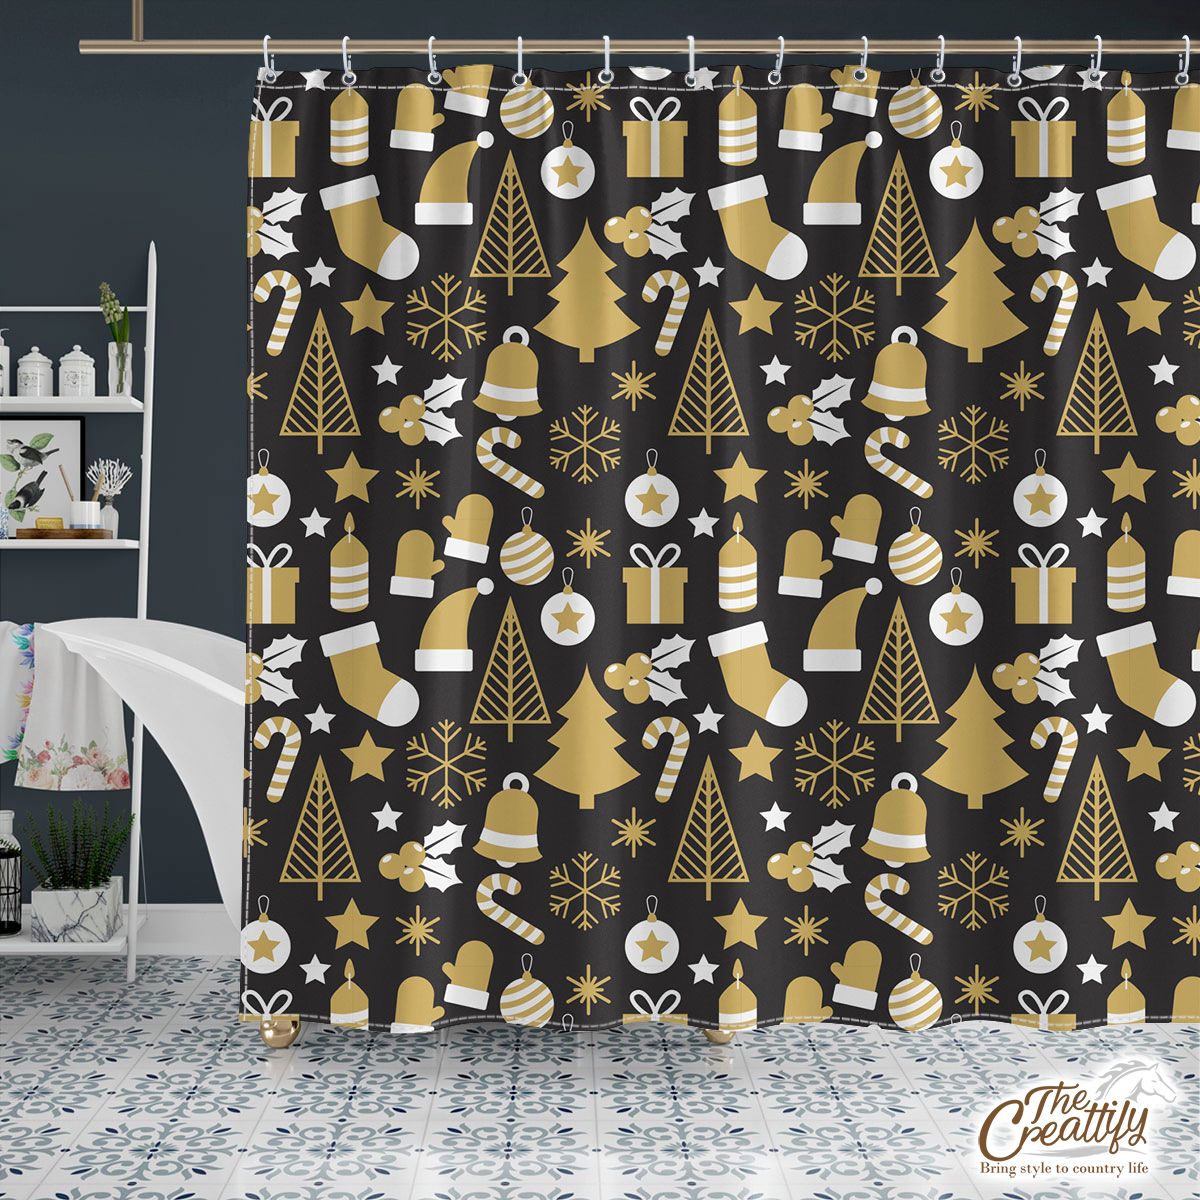 White And Gold Christmas Socks, Christmas Tree, Candy Cane On Black Background Shower Curtain